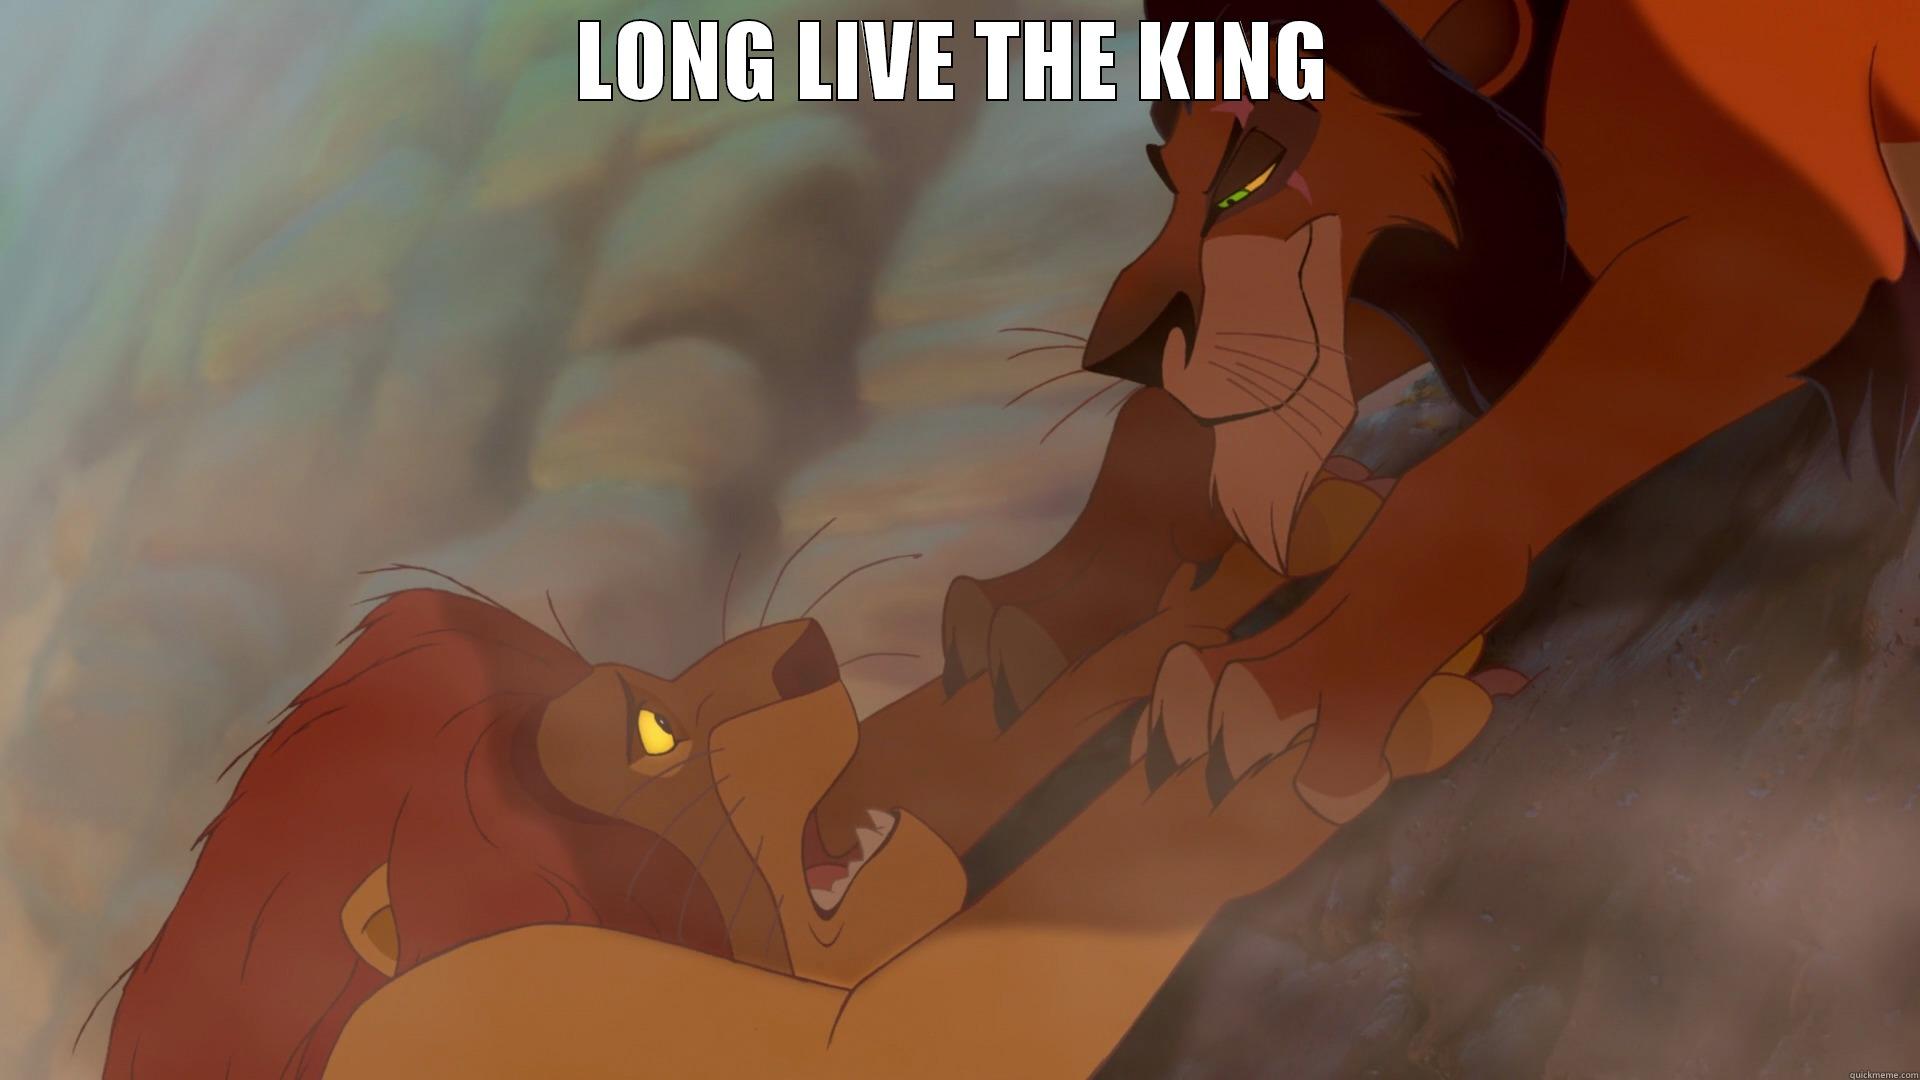 Long Live The King - LONG LIVE THE KING  Misc